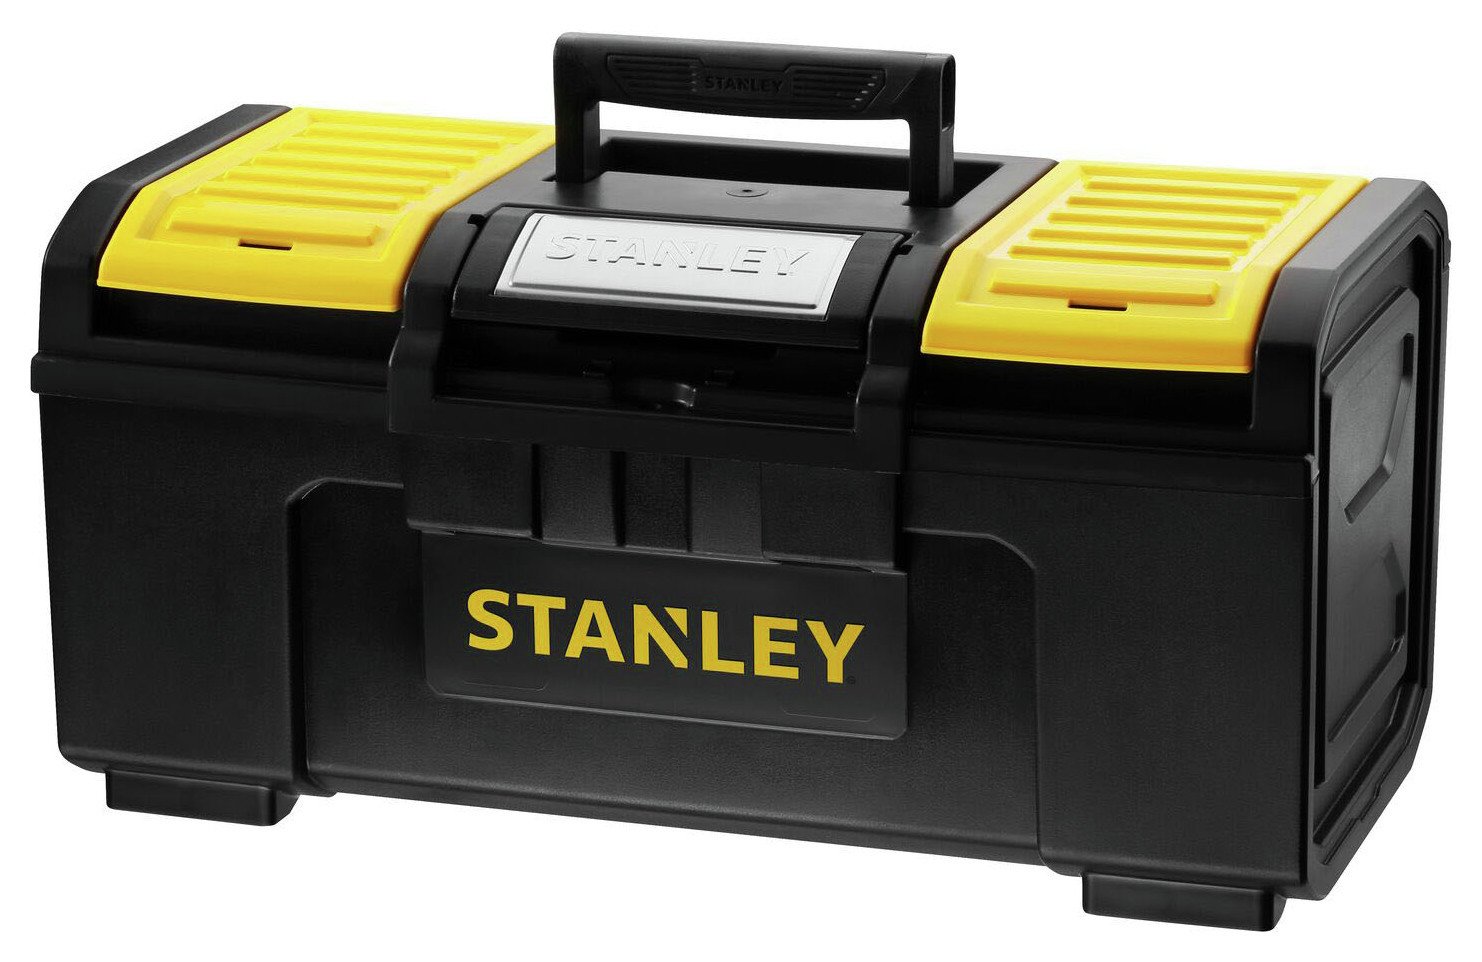 Stanley 19 Inch One Touch Toolbox